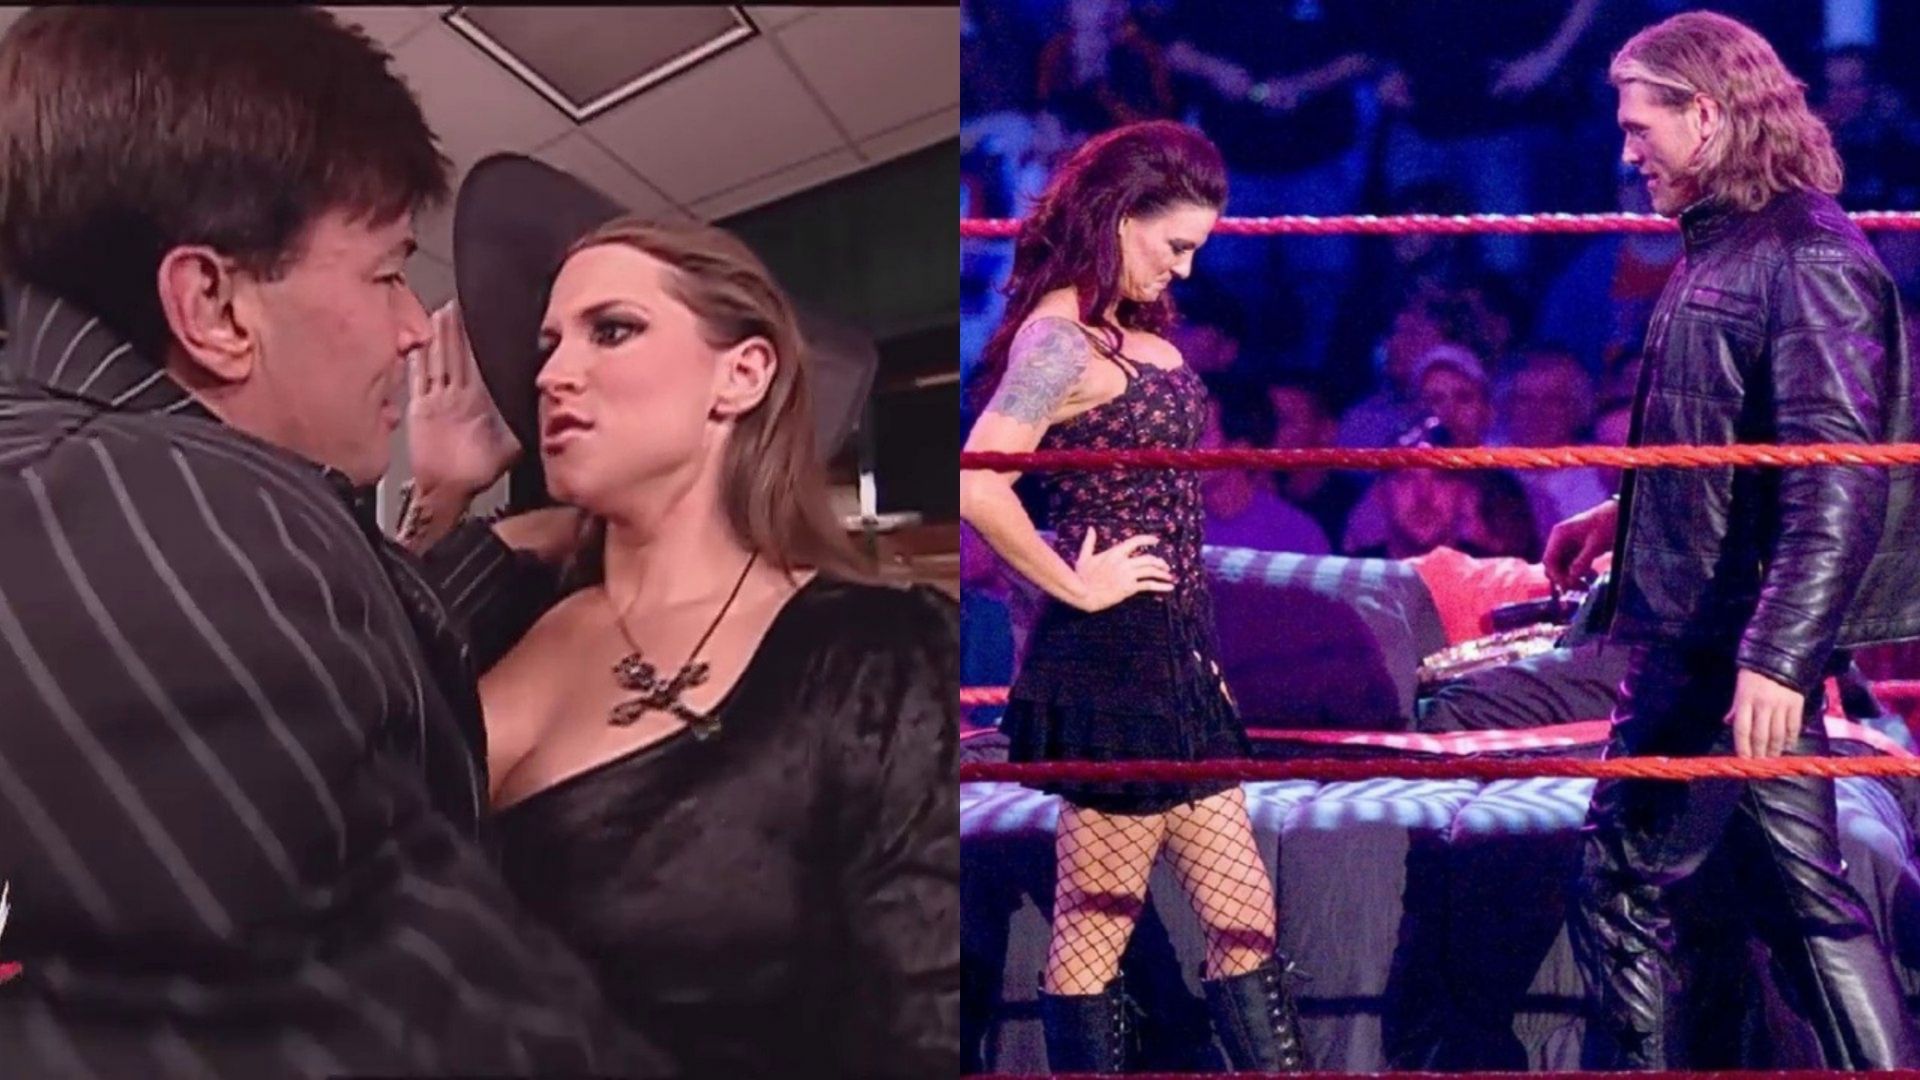 Stephanie McMahon with Eric Bischoff (left) and Edge with Lita (right)